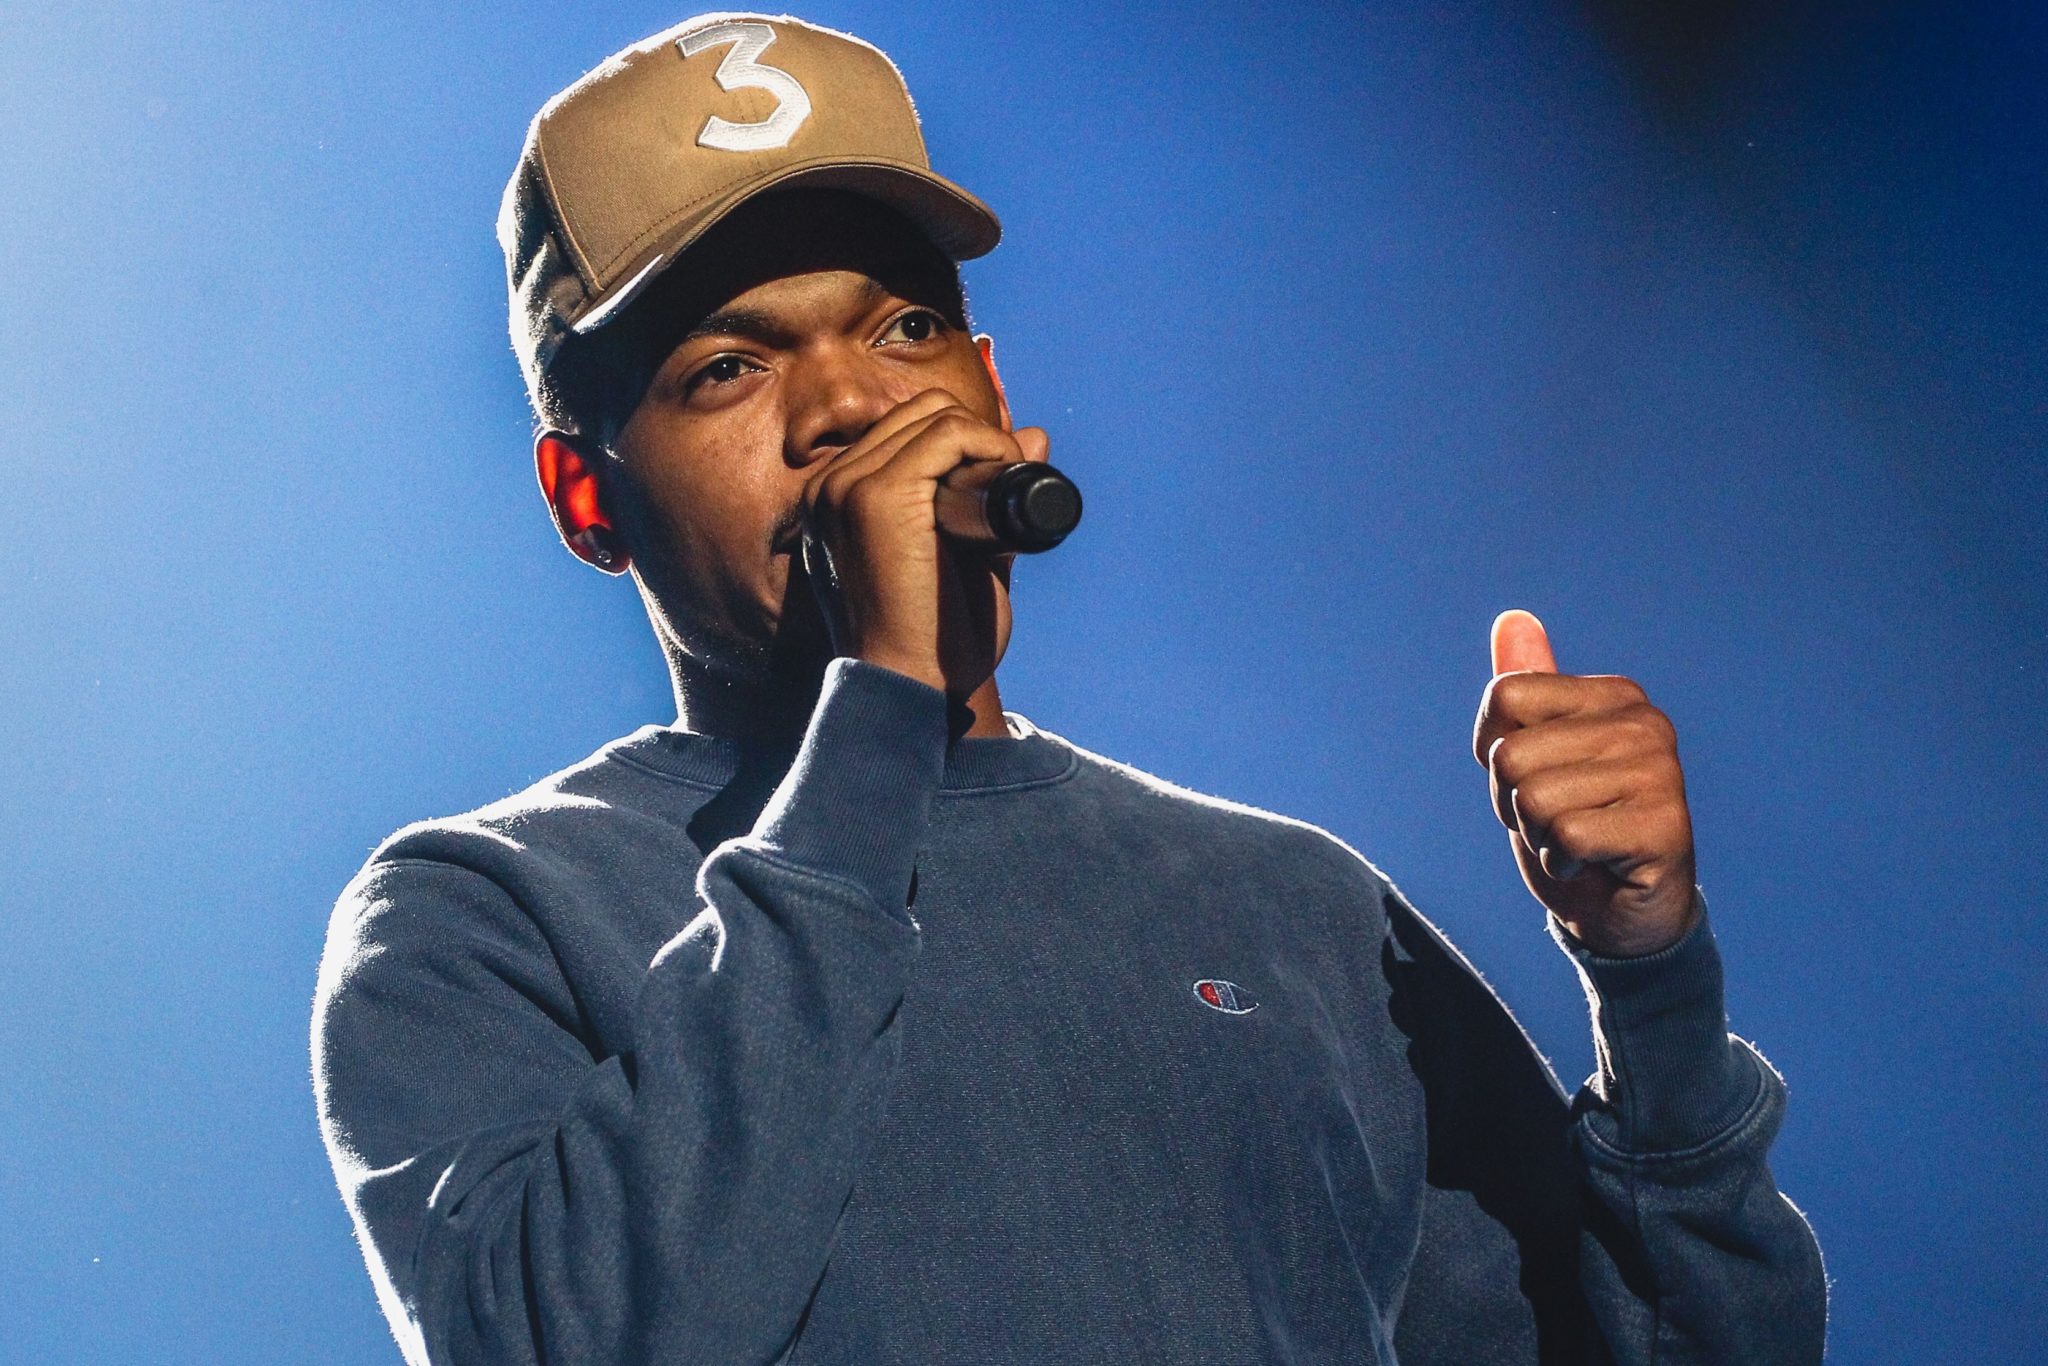 Chance the Rapper Reveals Jeremih due to Leave the Hospital After COVID-19 Battle